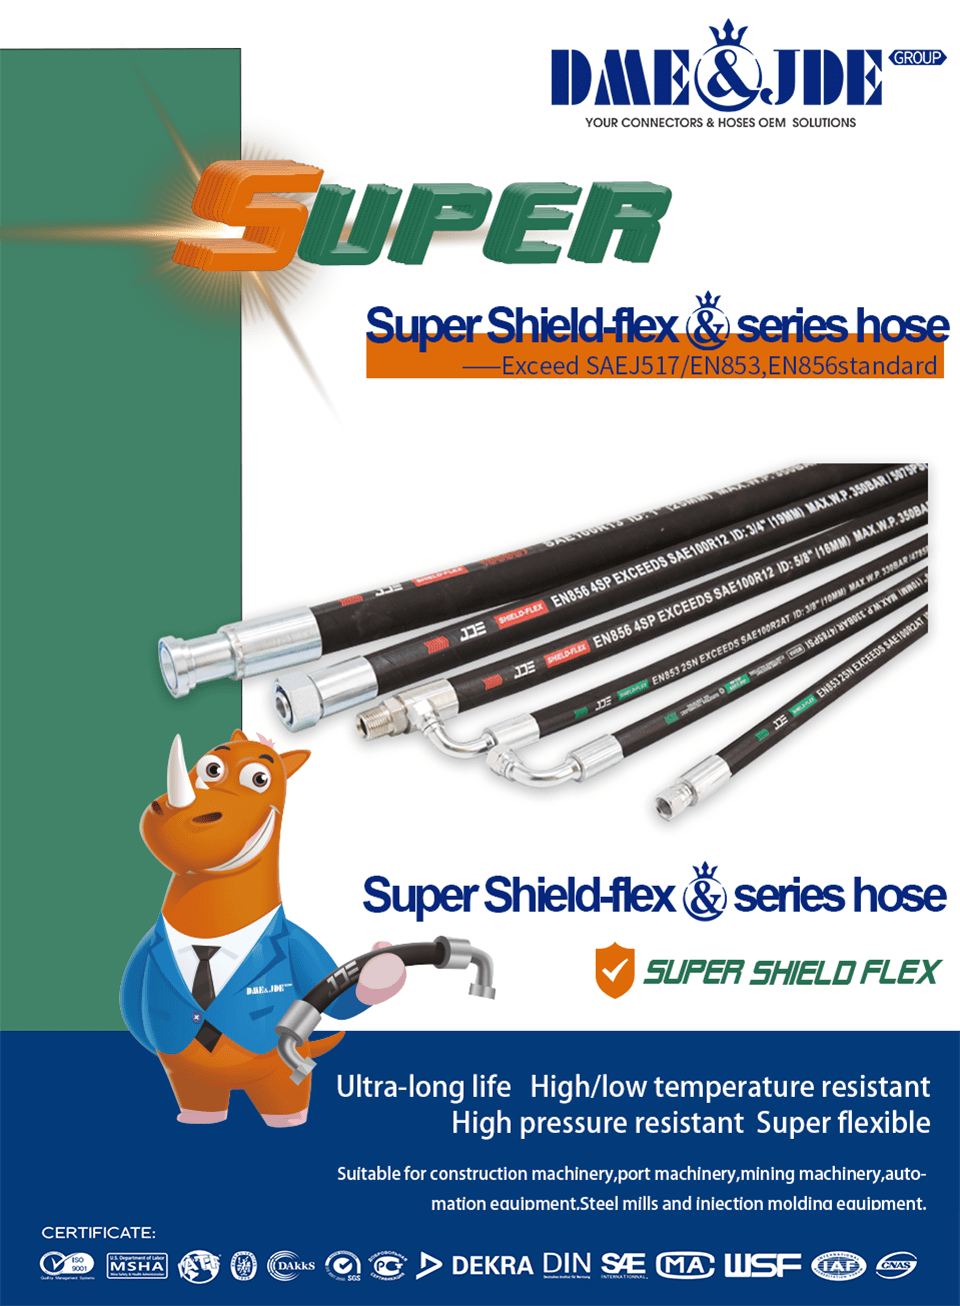 Mr. Niuniu and our super shield-flex series hoses in various sizes and colors